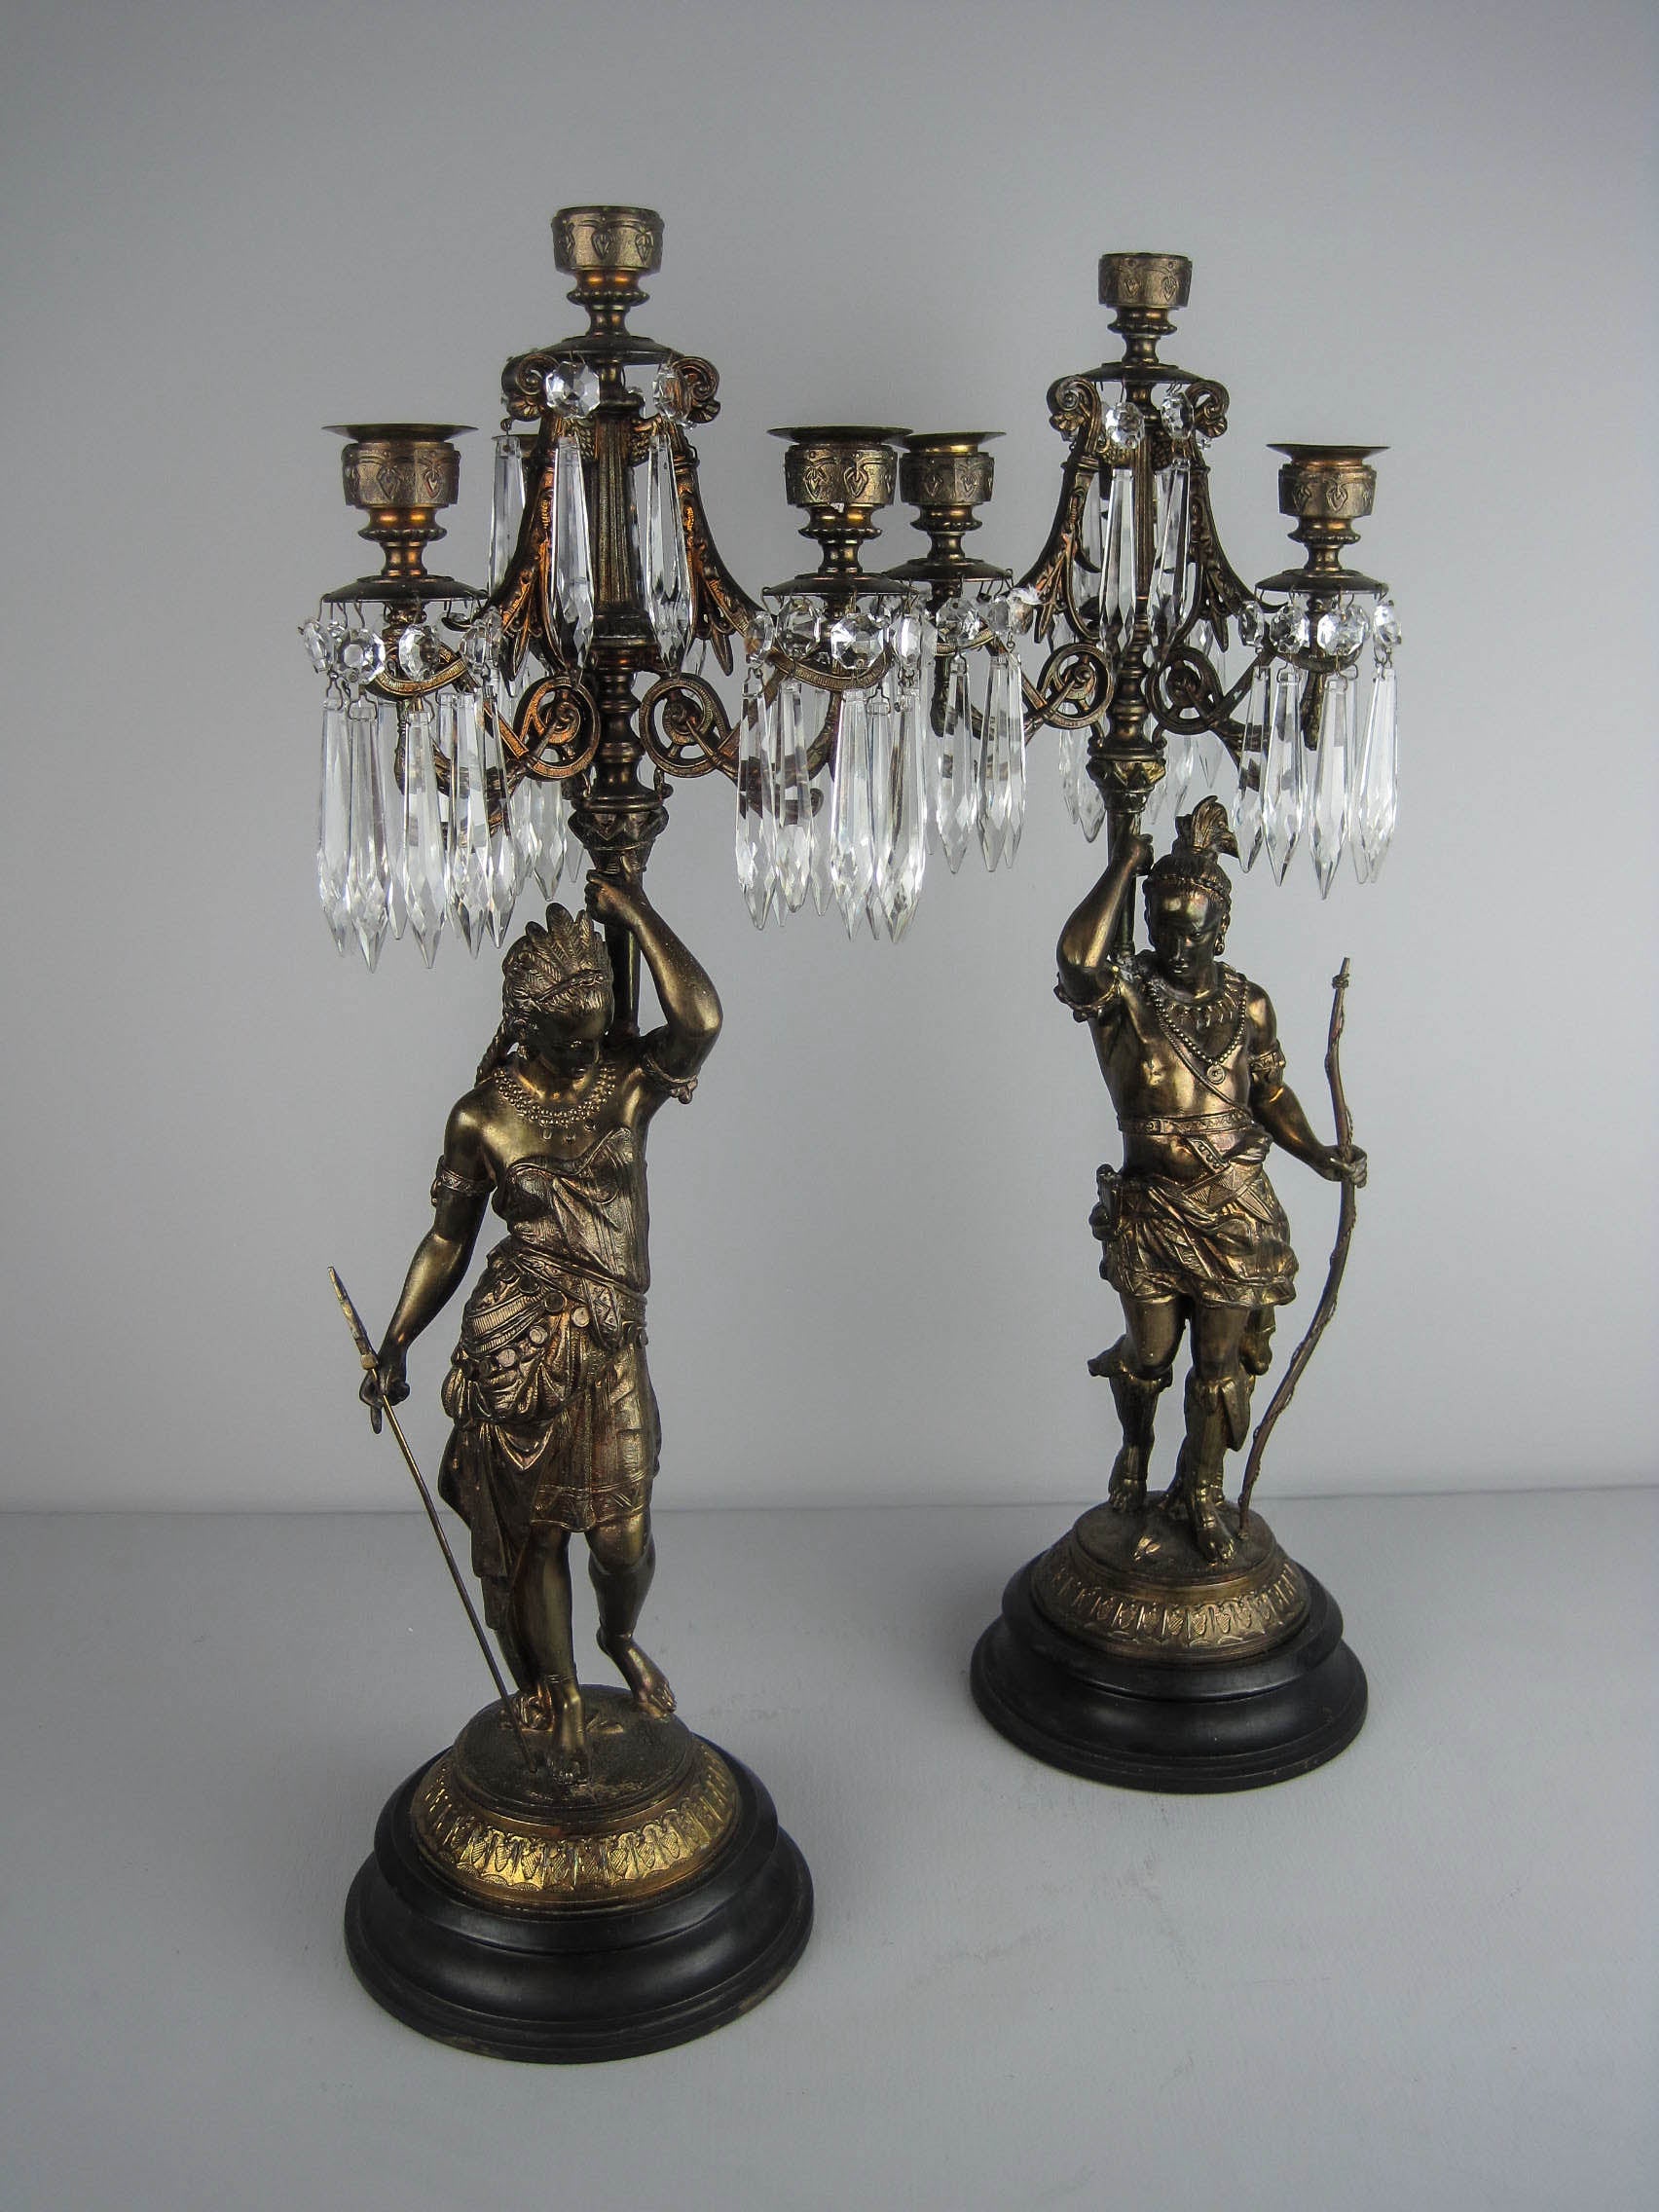 "MITCHELL, VANCE & CO." American Indian Candelabra For Sale